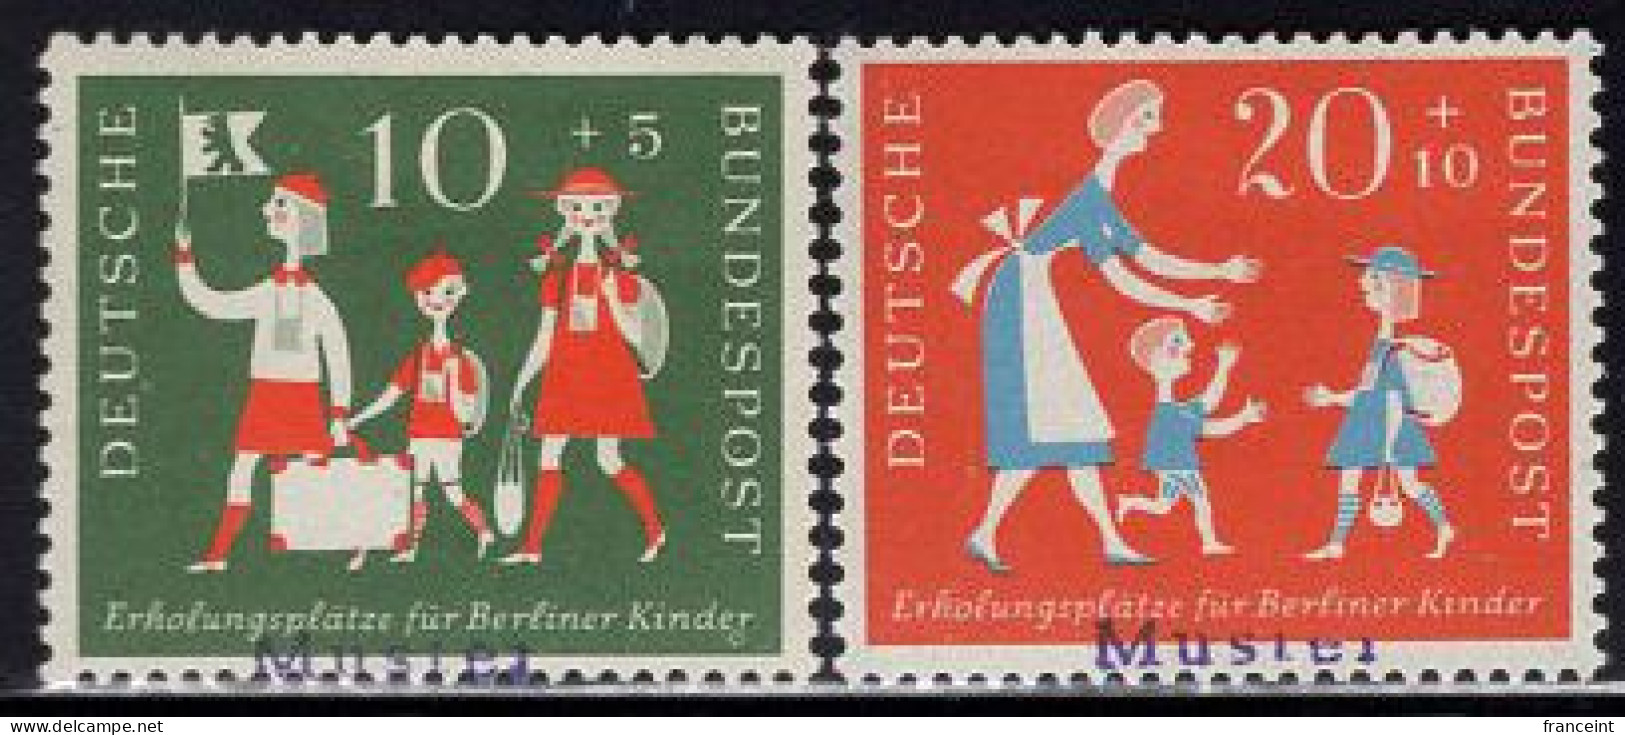 GERMANY(1957) Children Entering, Leaving Berlin. Set Of 2 With MUSTER (specimen) Overprint. Vacations For Berlin Childre - Other & Unclassified